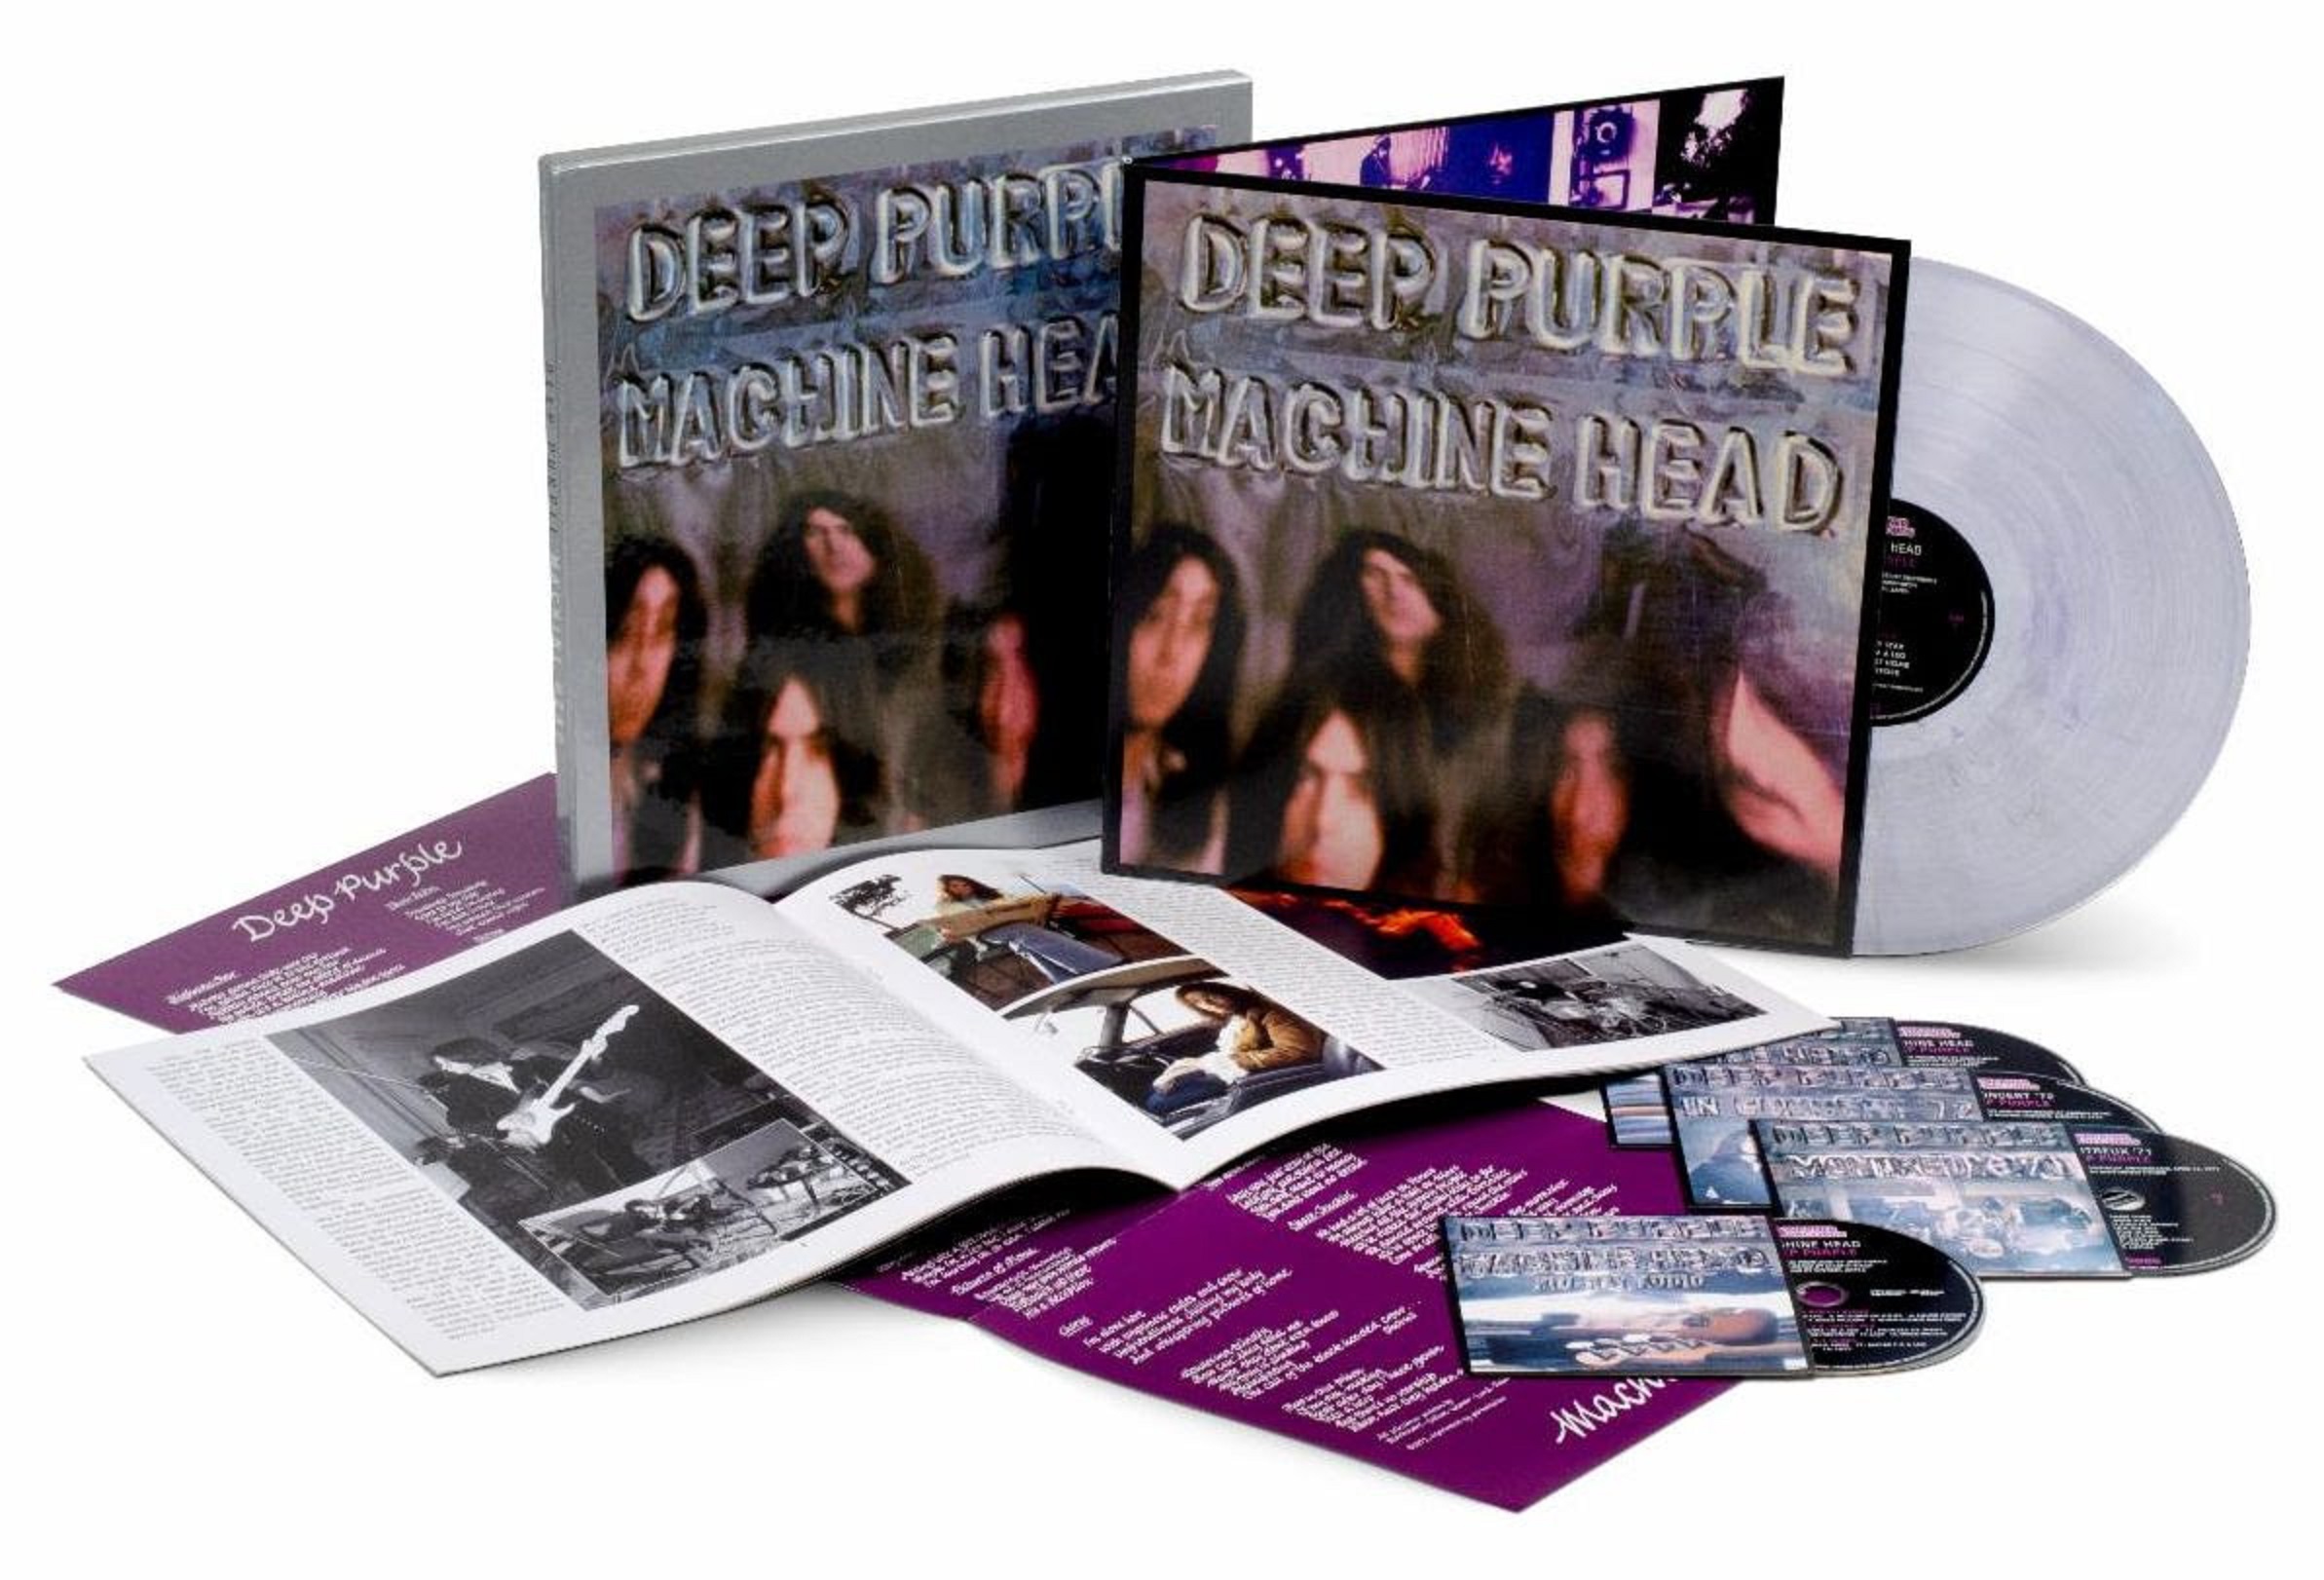 Deep Purple's Machine Head Gets Super Deluxe Edition Treatment, out March 29